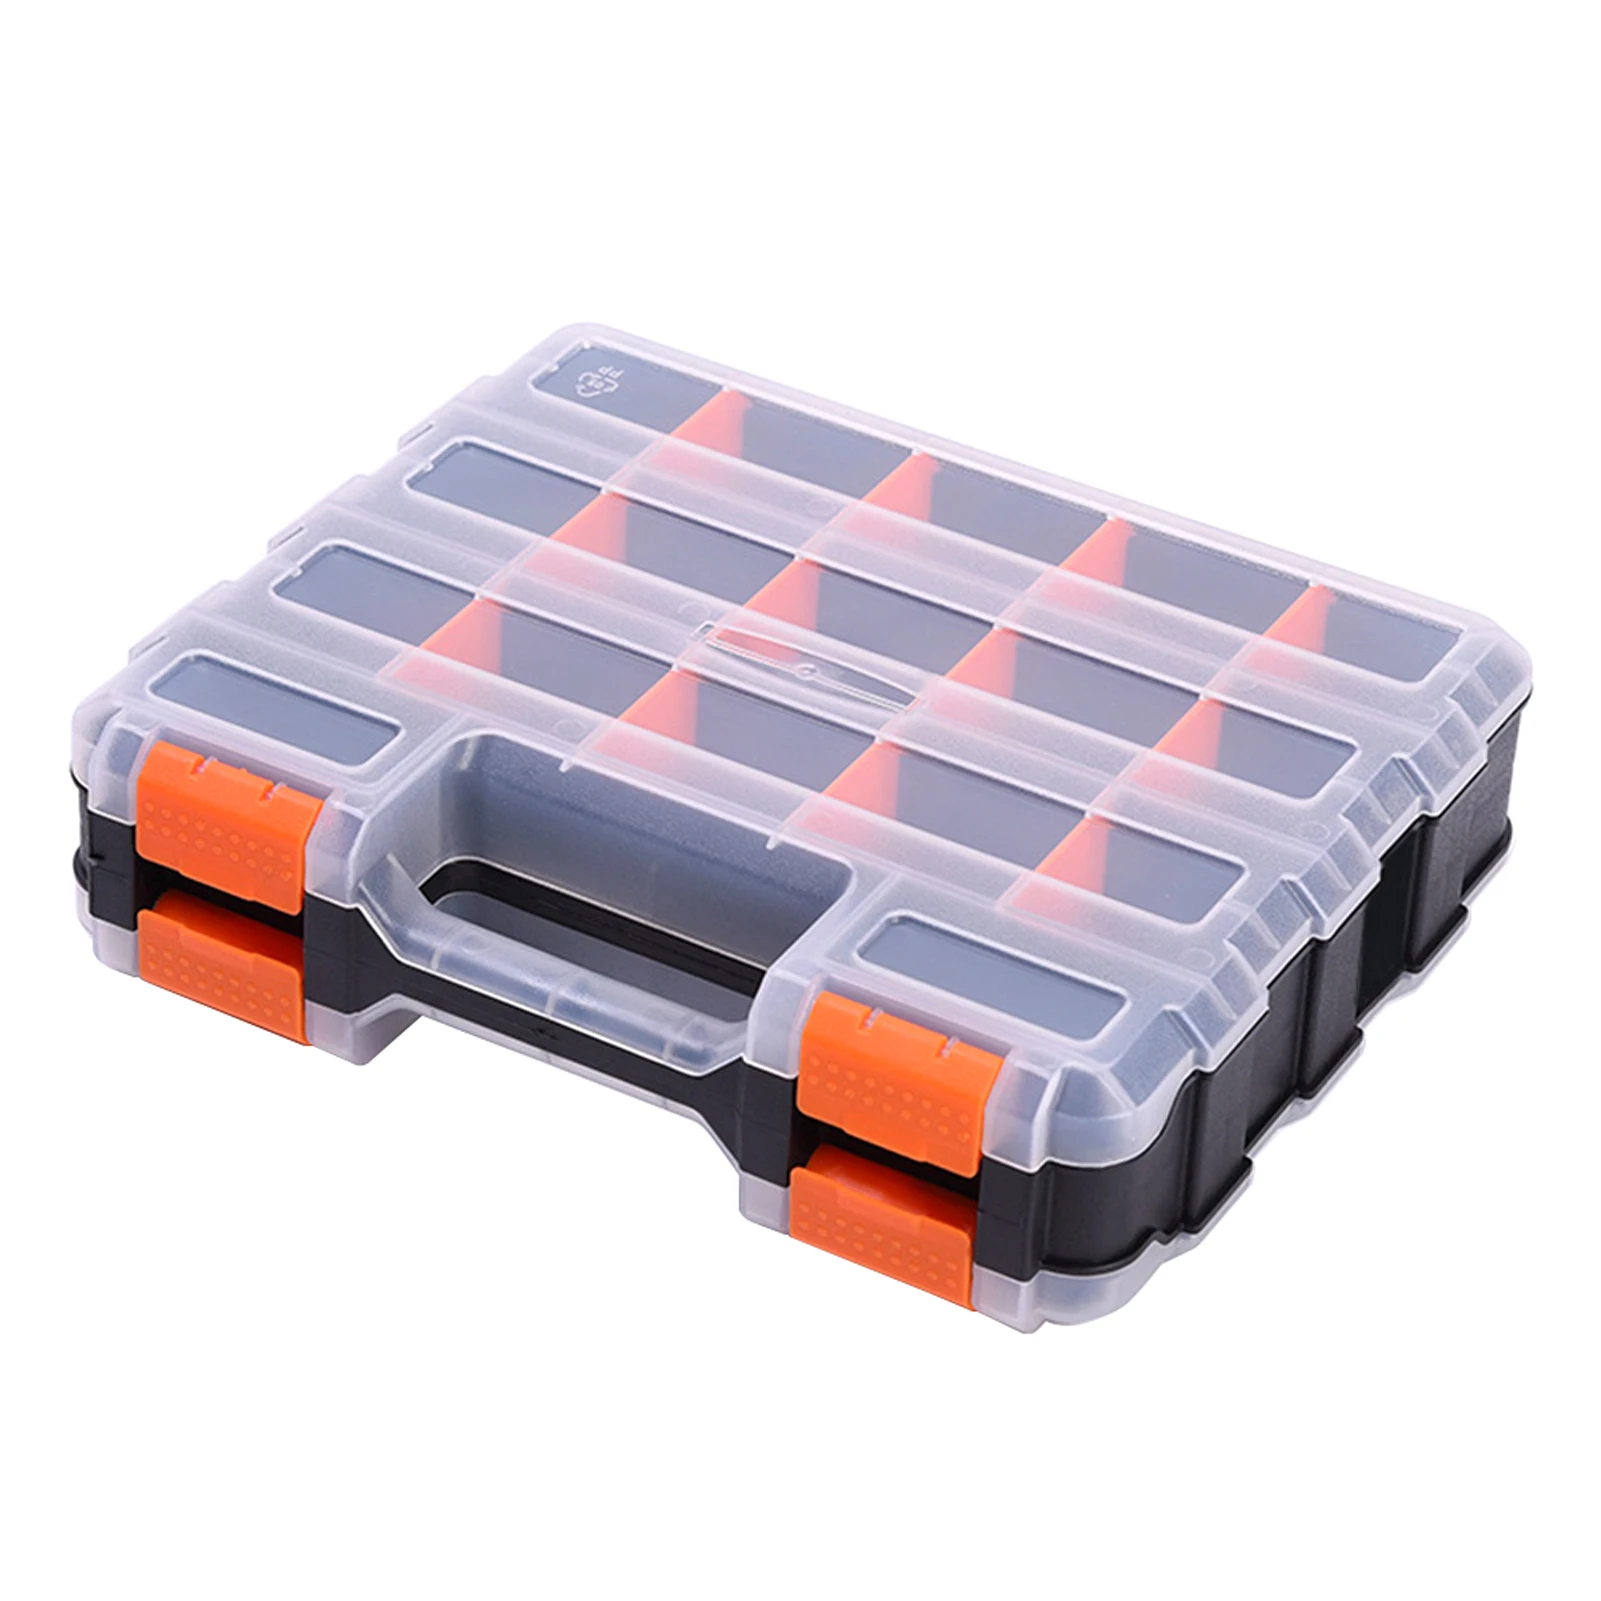 

Bolts Double Sided Nuts Durable Tool Box Organizer For Screws Hardware Storage Case Small Parts Nails Portable Compartment